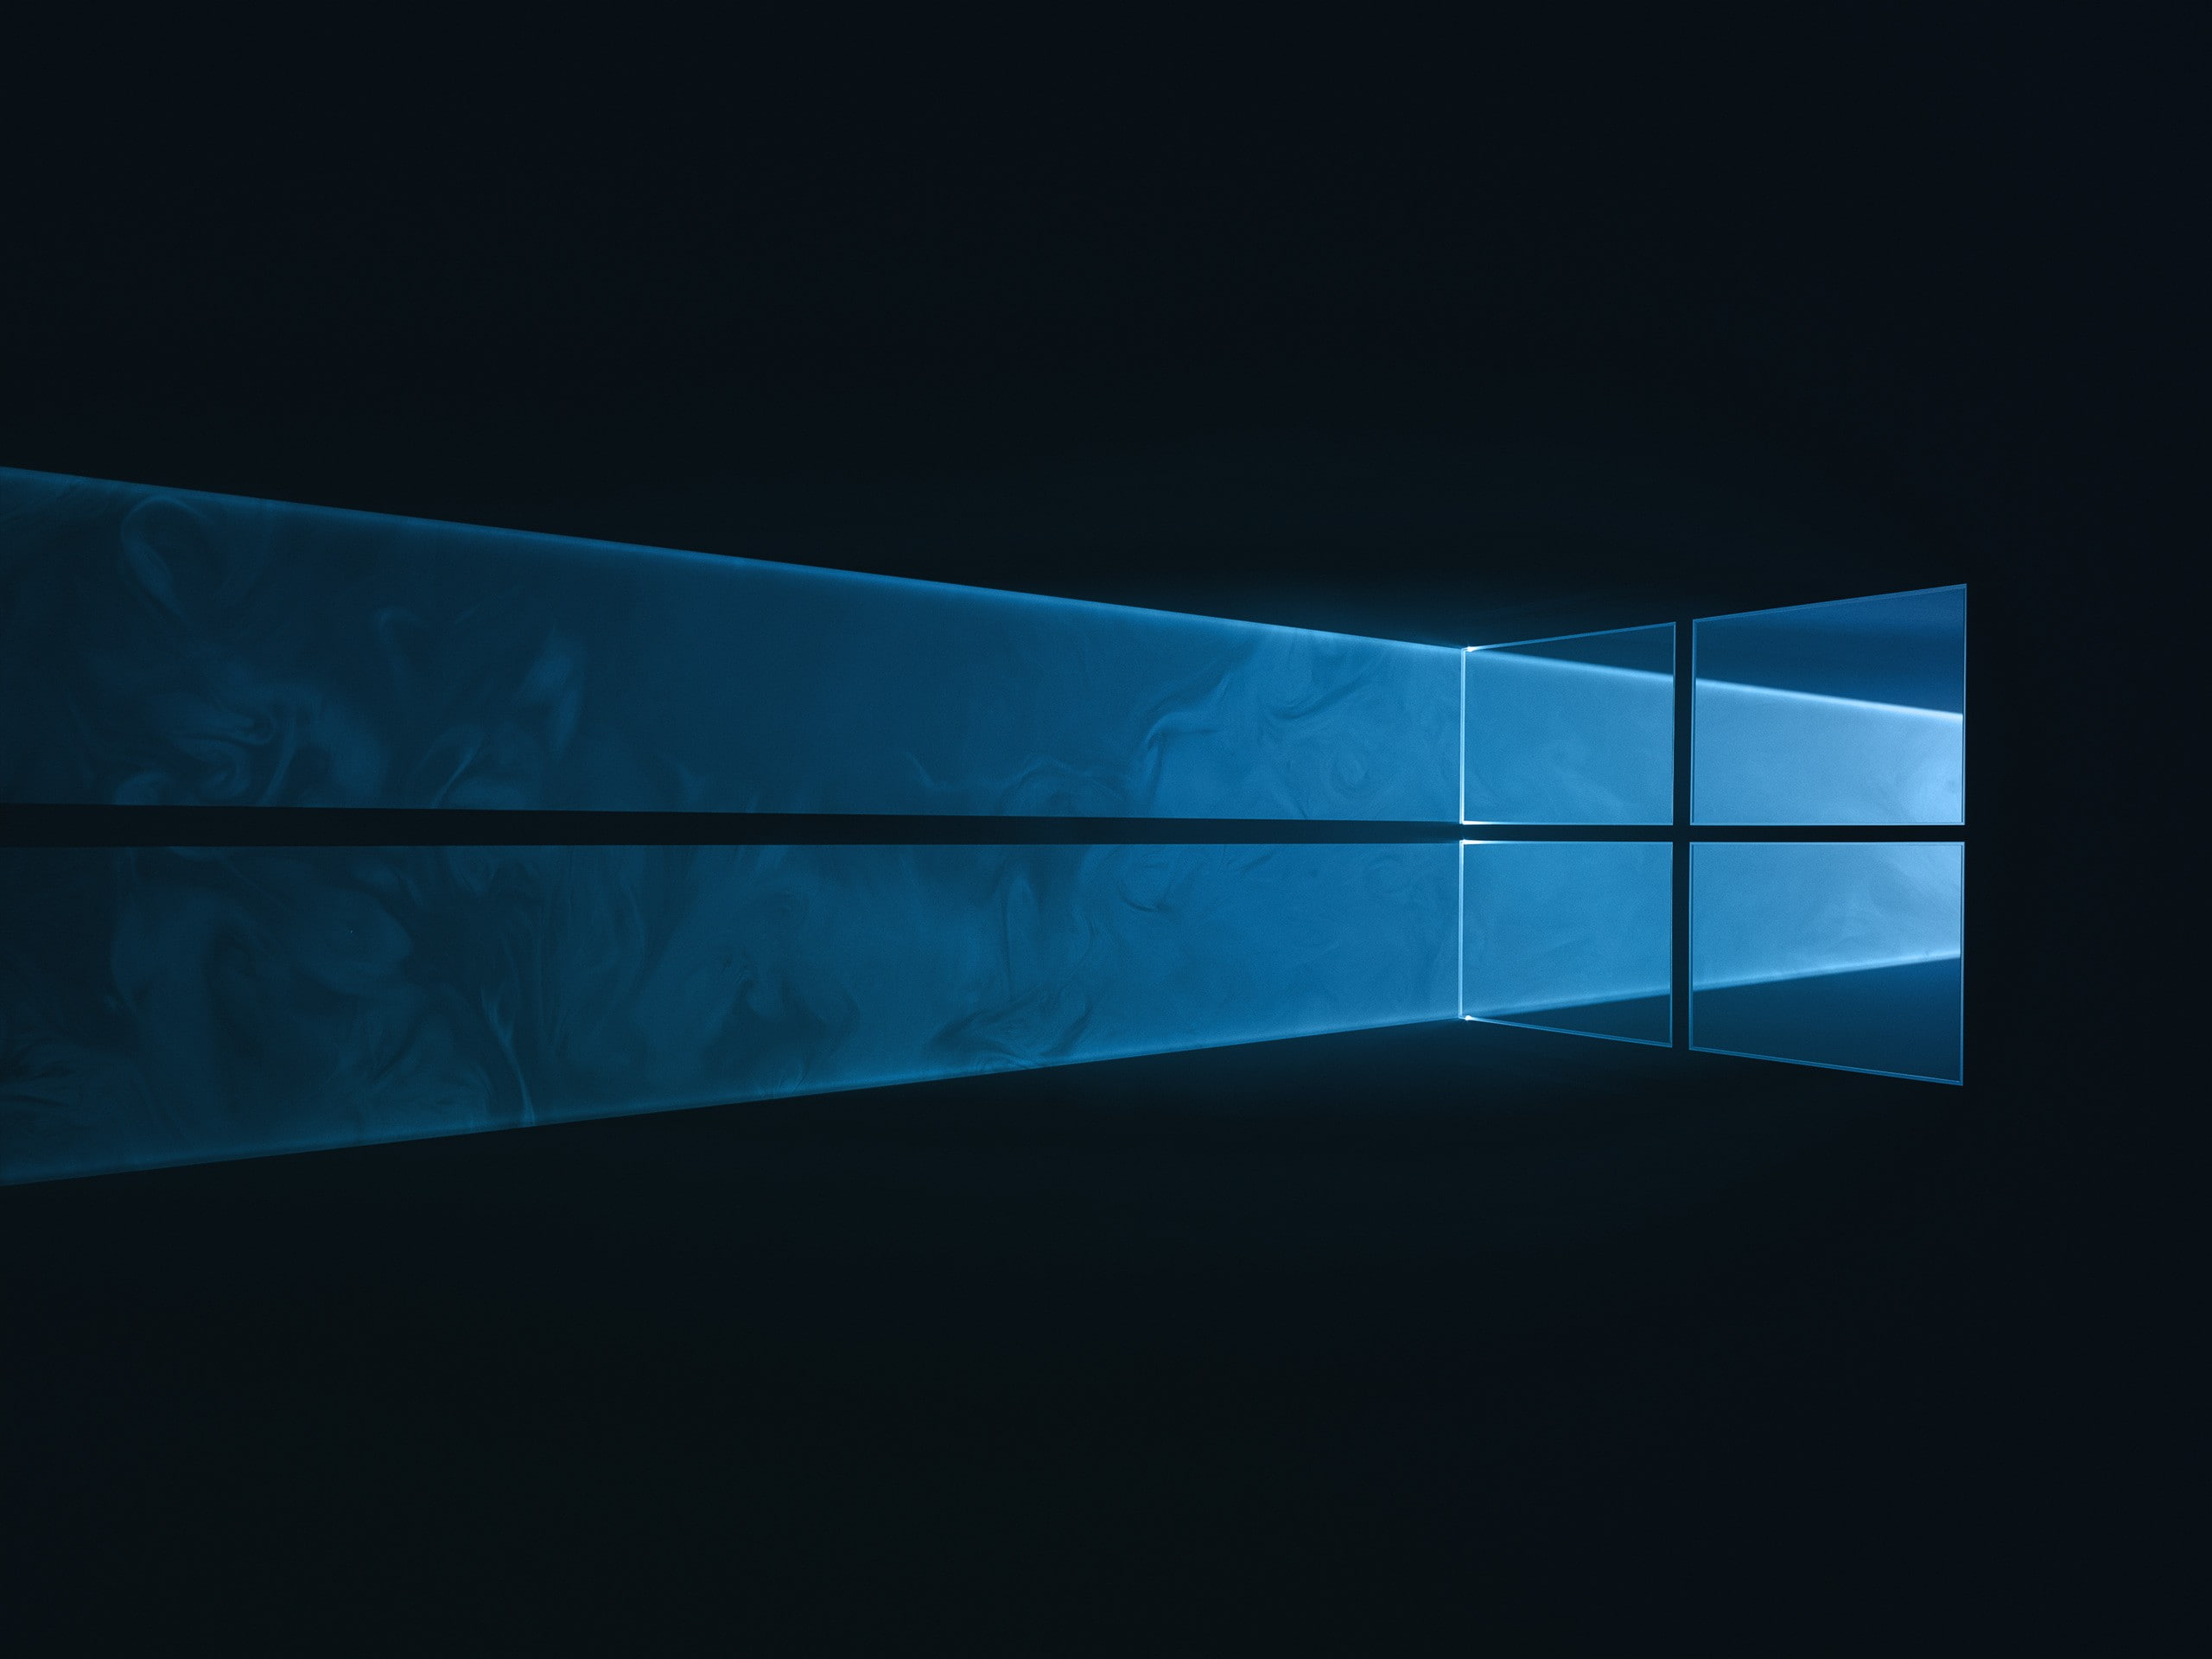 Windows 10, abstract, GMUNK, blue, indoors, copy space, reflection